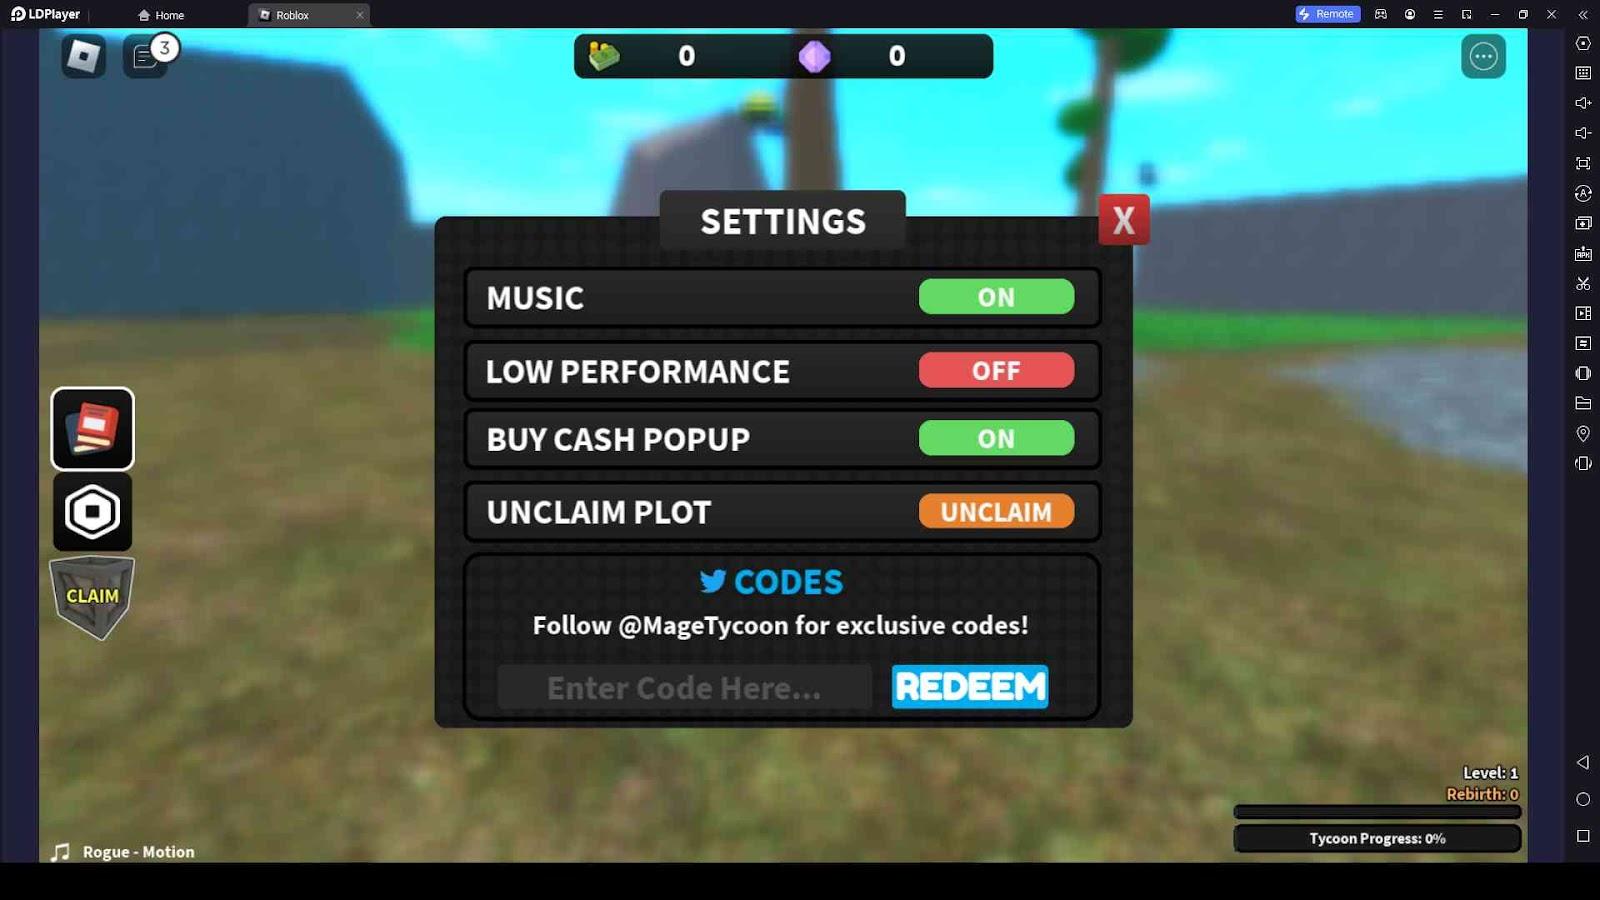 Mage Tycoon Codes - Roblox